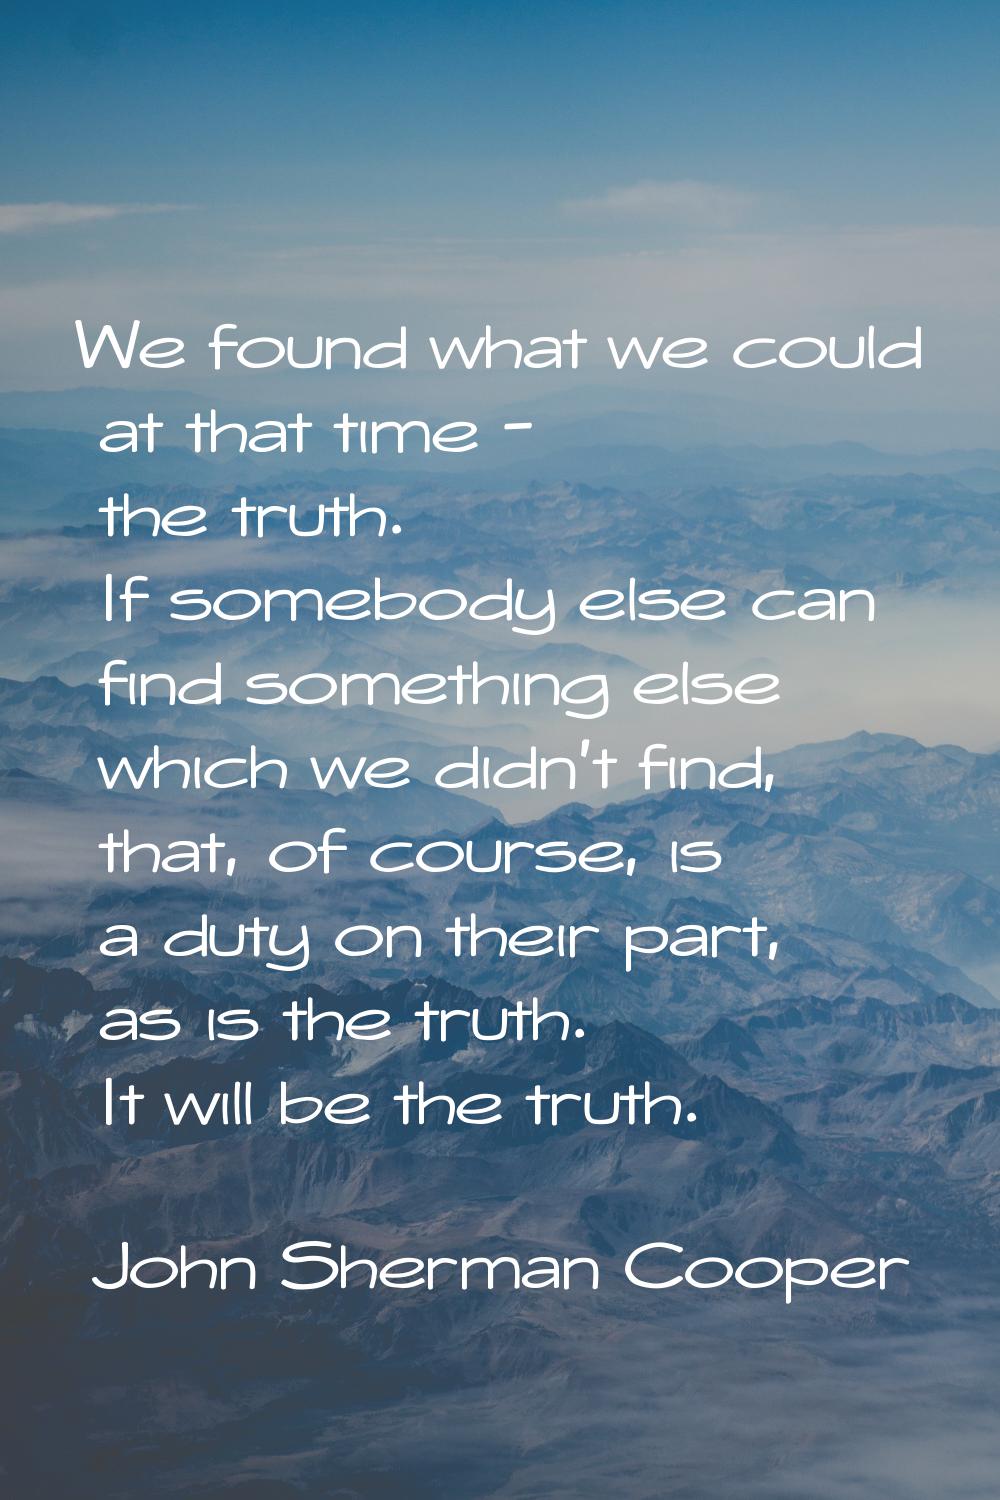 We found what we could at that time - the truth. If somebody else can find something else which we 